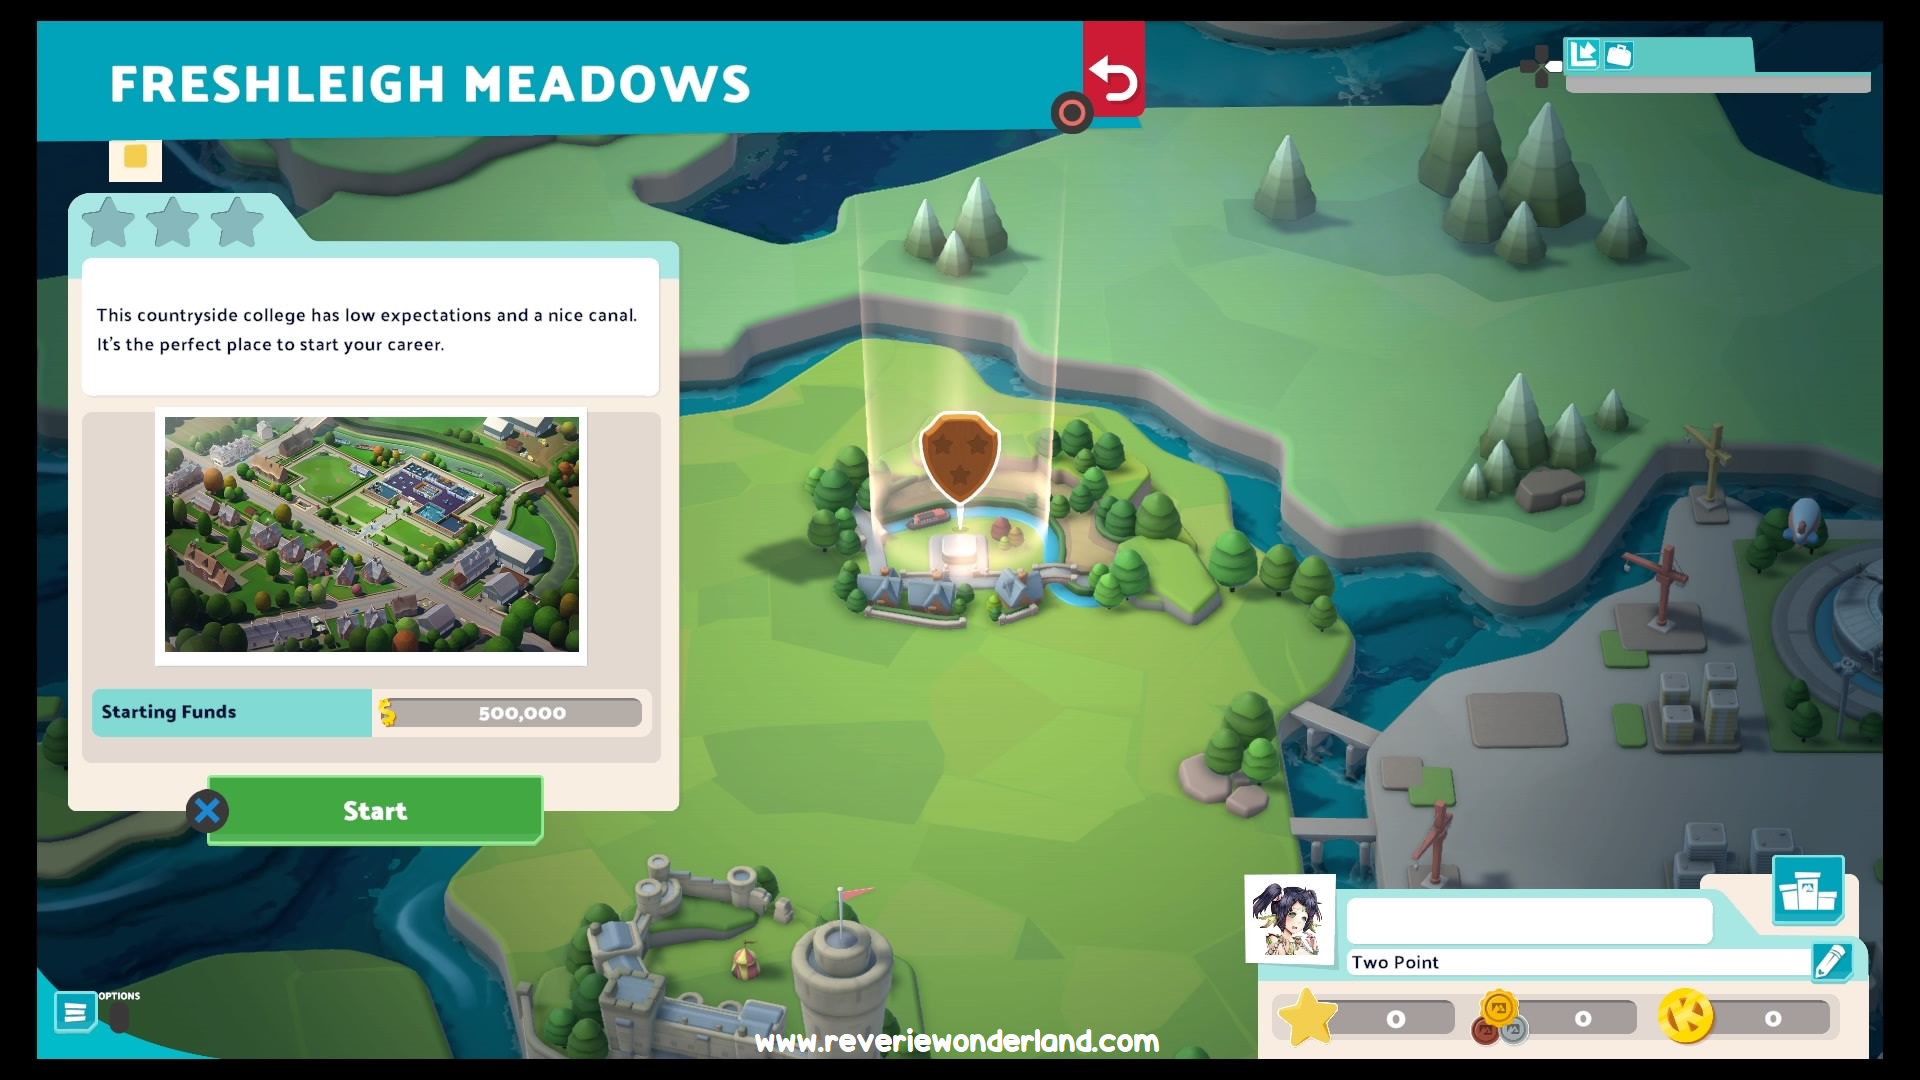 Game Review: Two Point Campus Reverie Wonderland